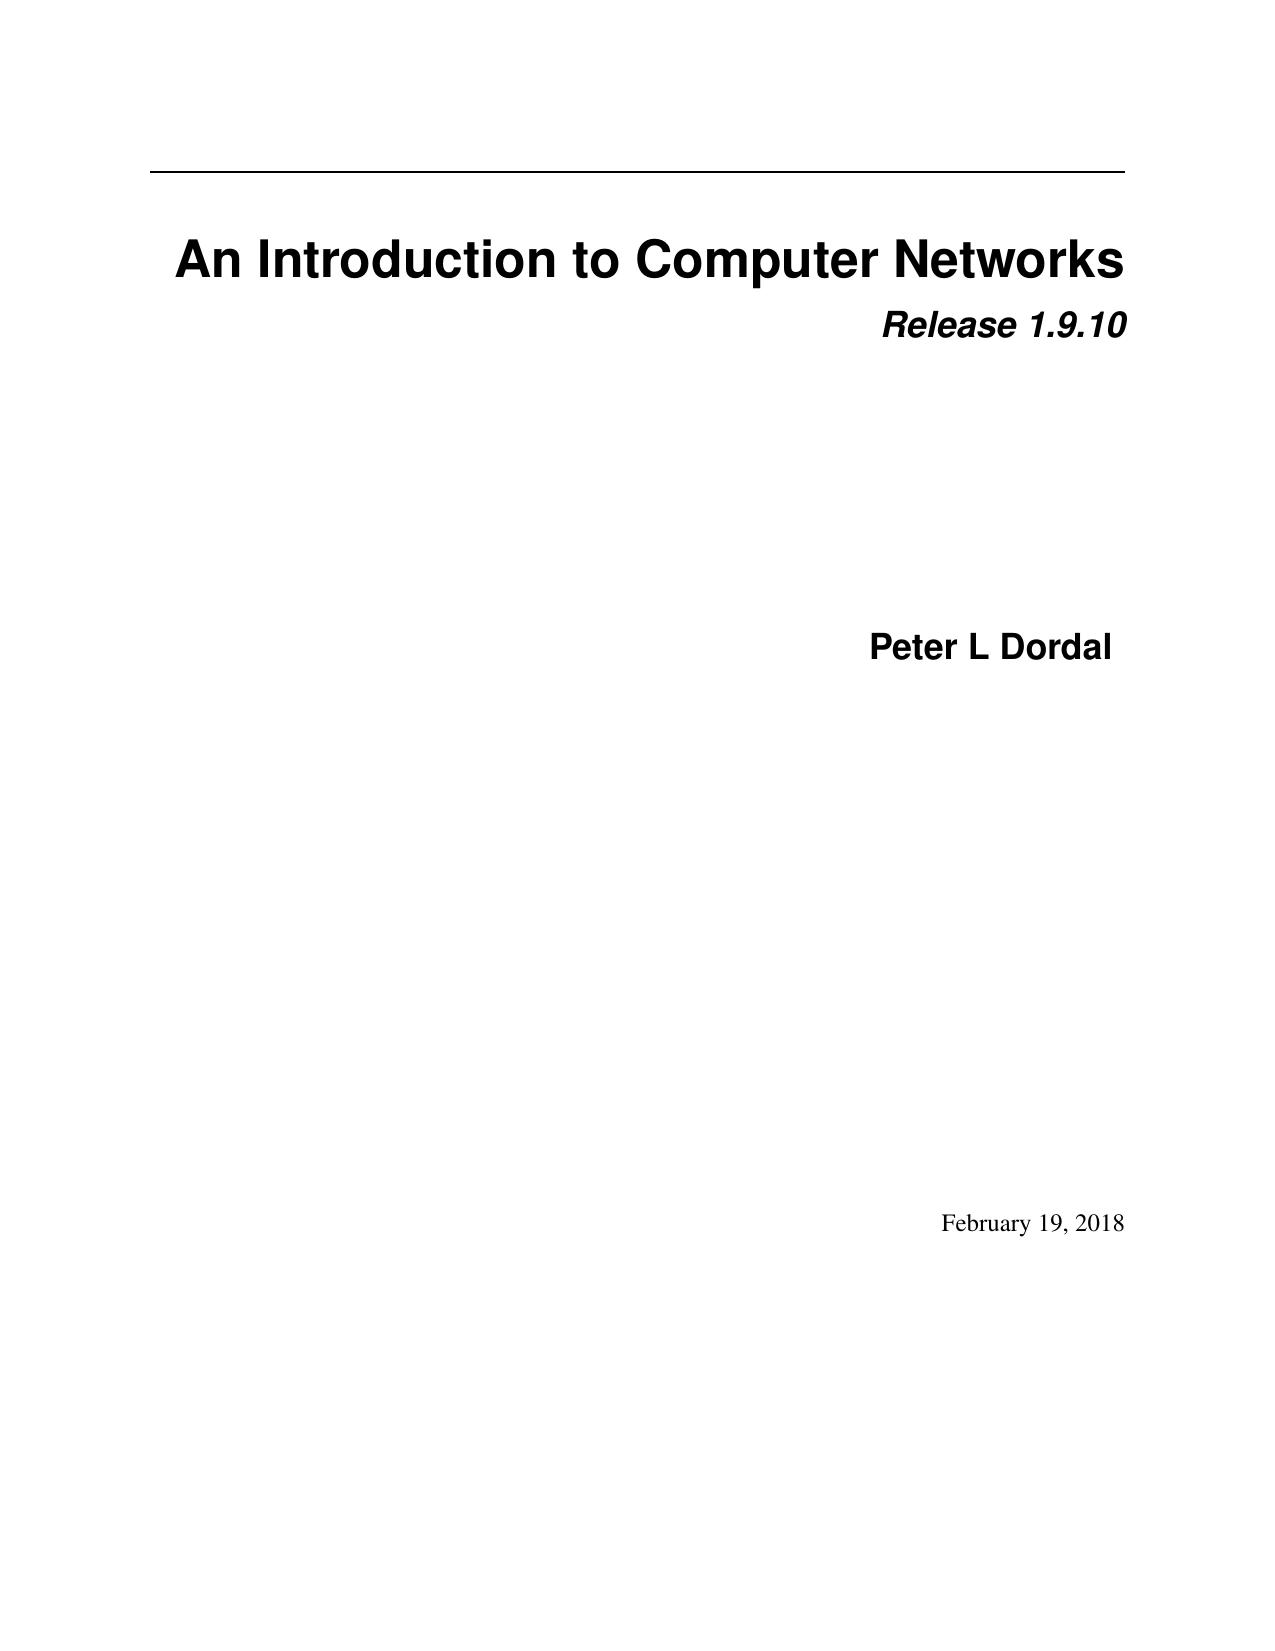 ComputerNetworks Text Book